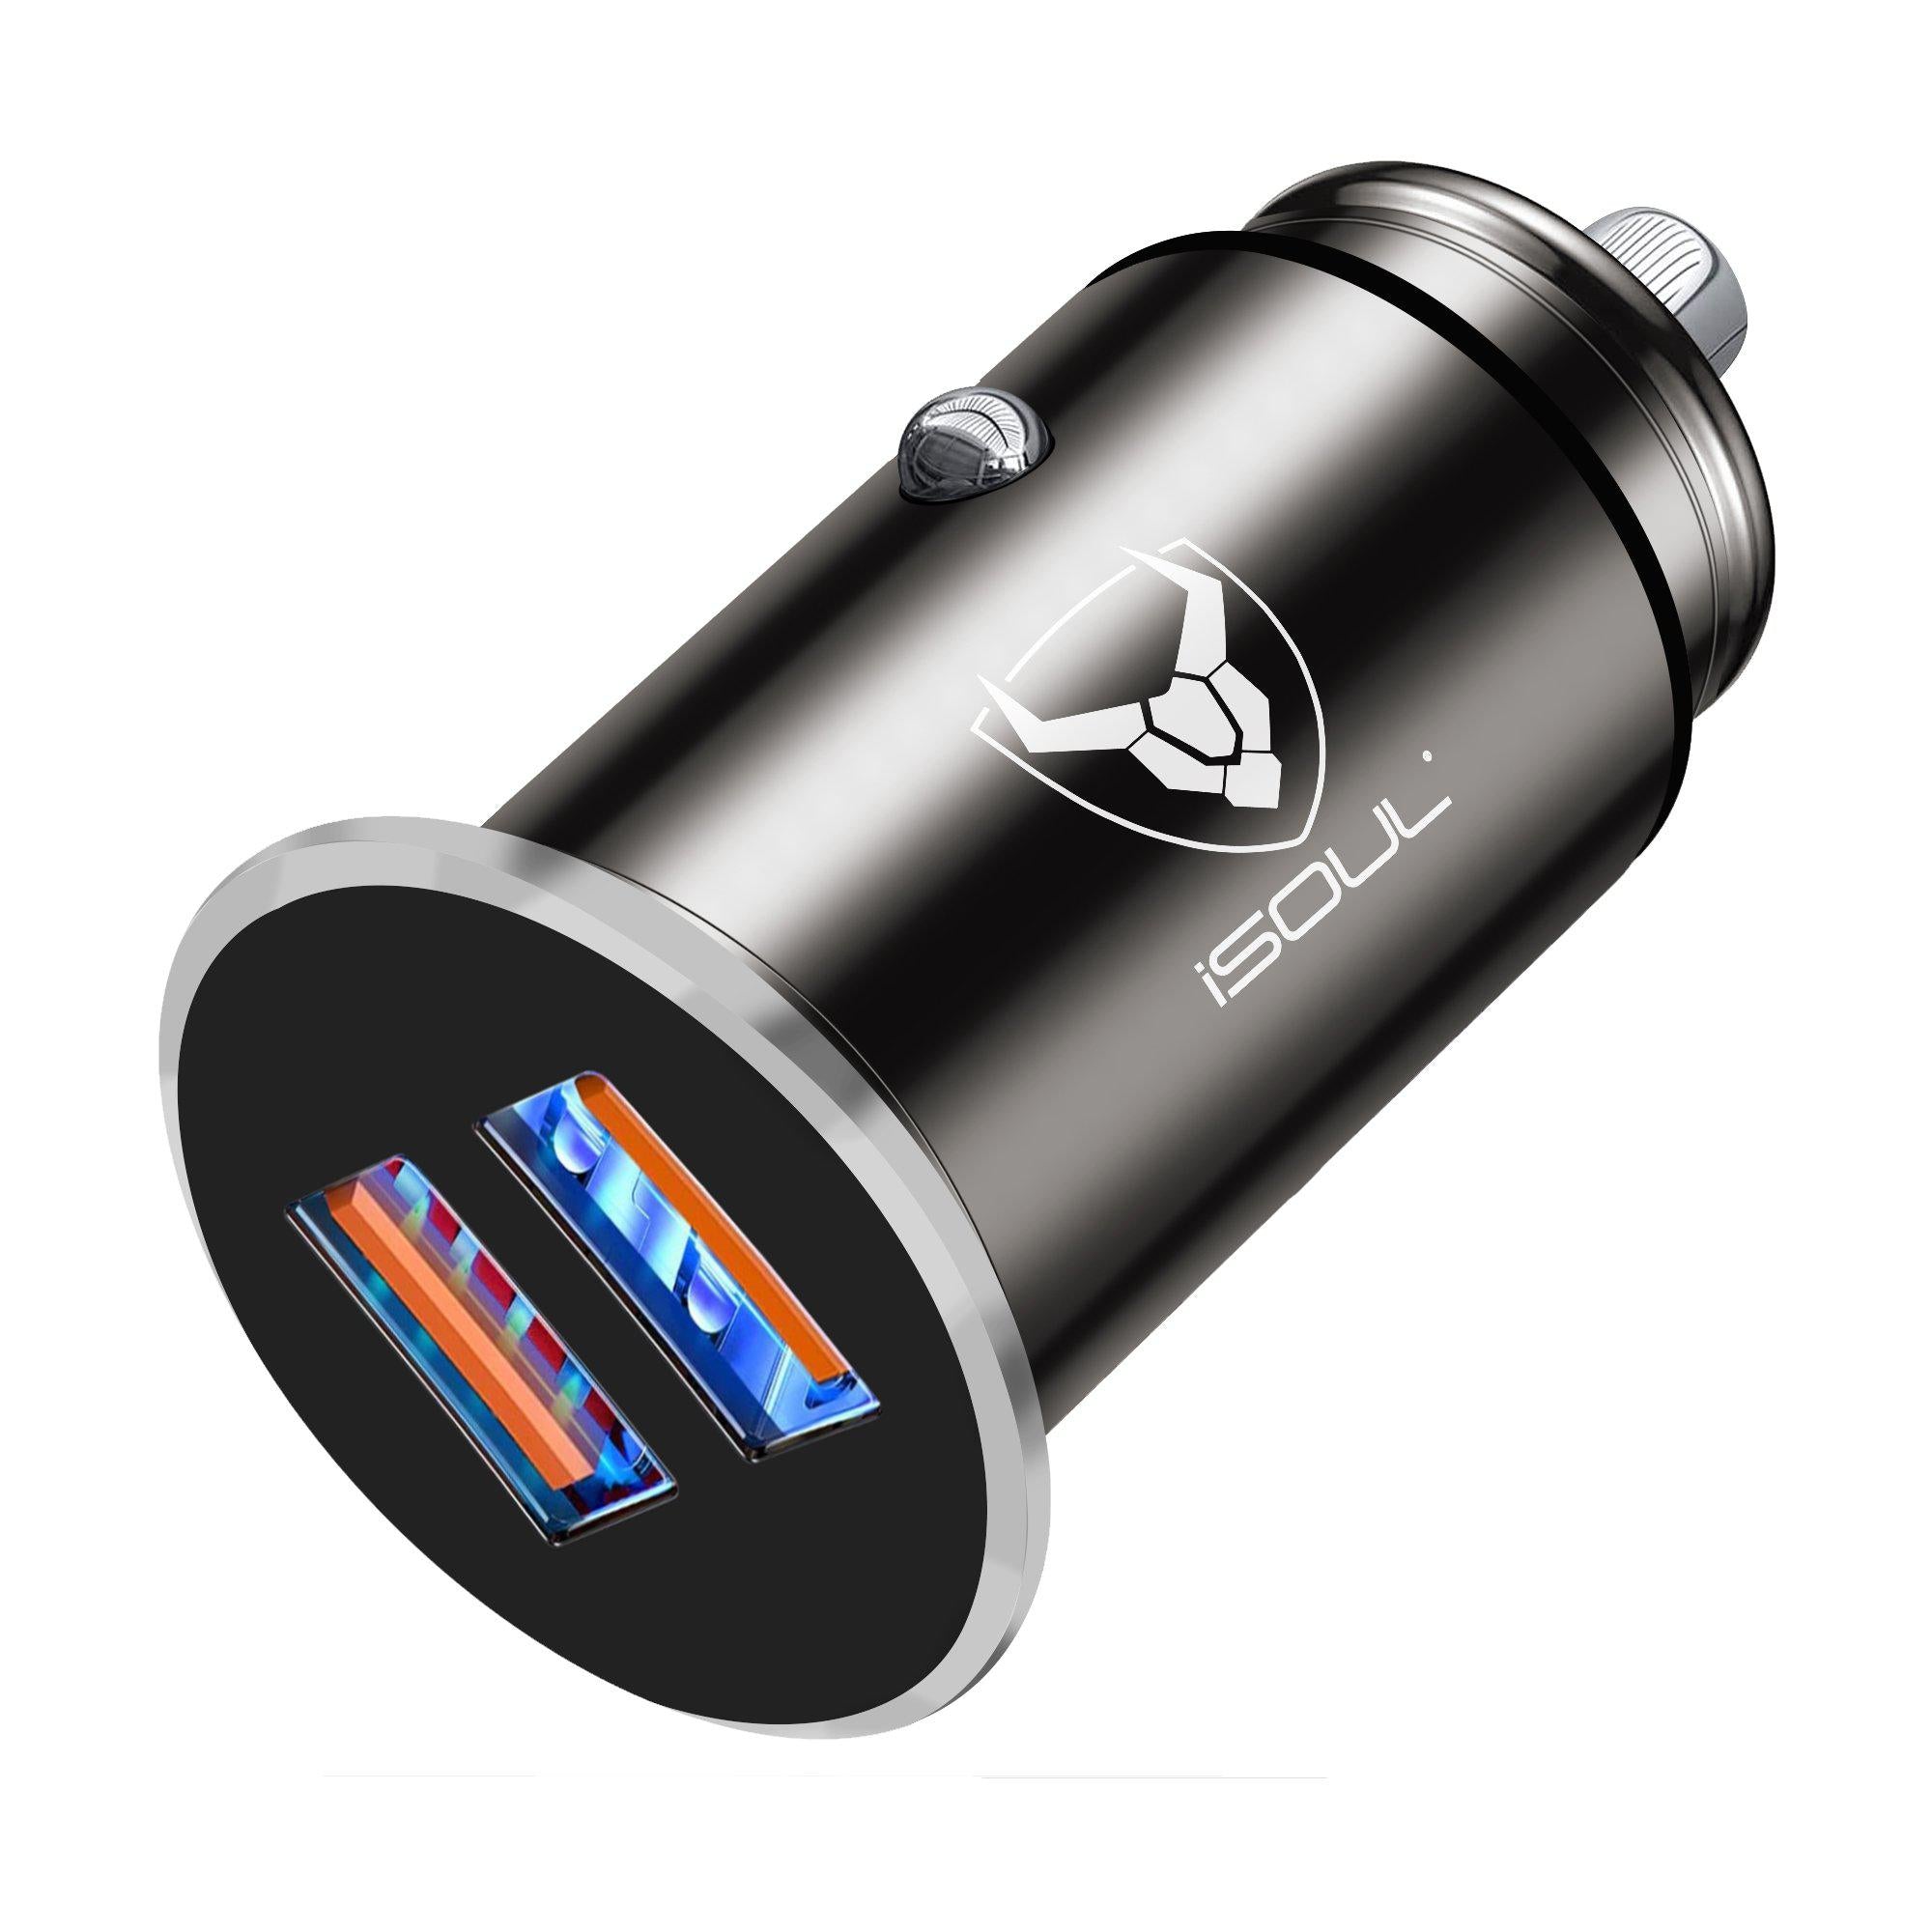 Fast Charging Dual Port USB Car Charger with QUALCOMM 3.0 Chip